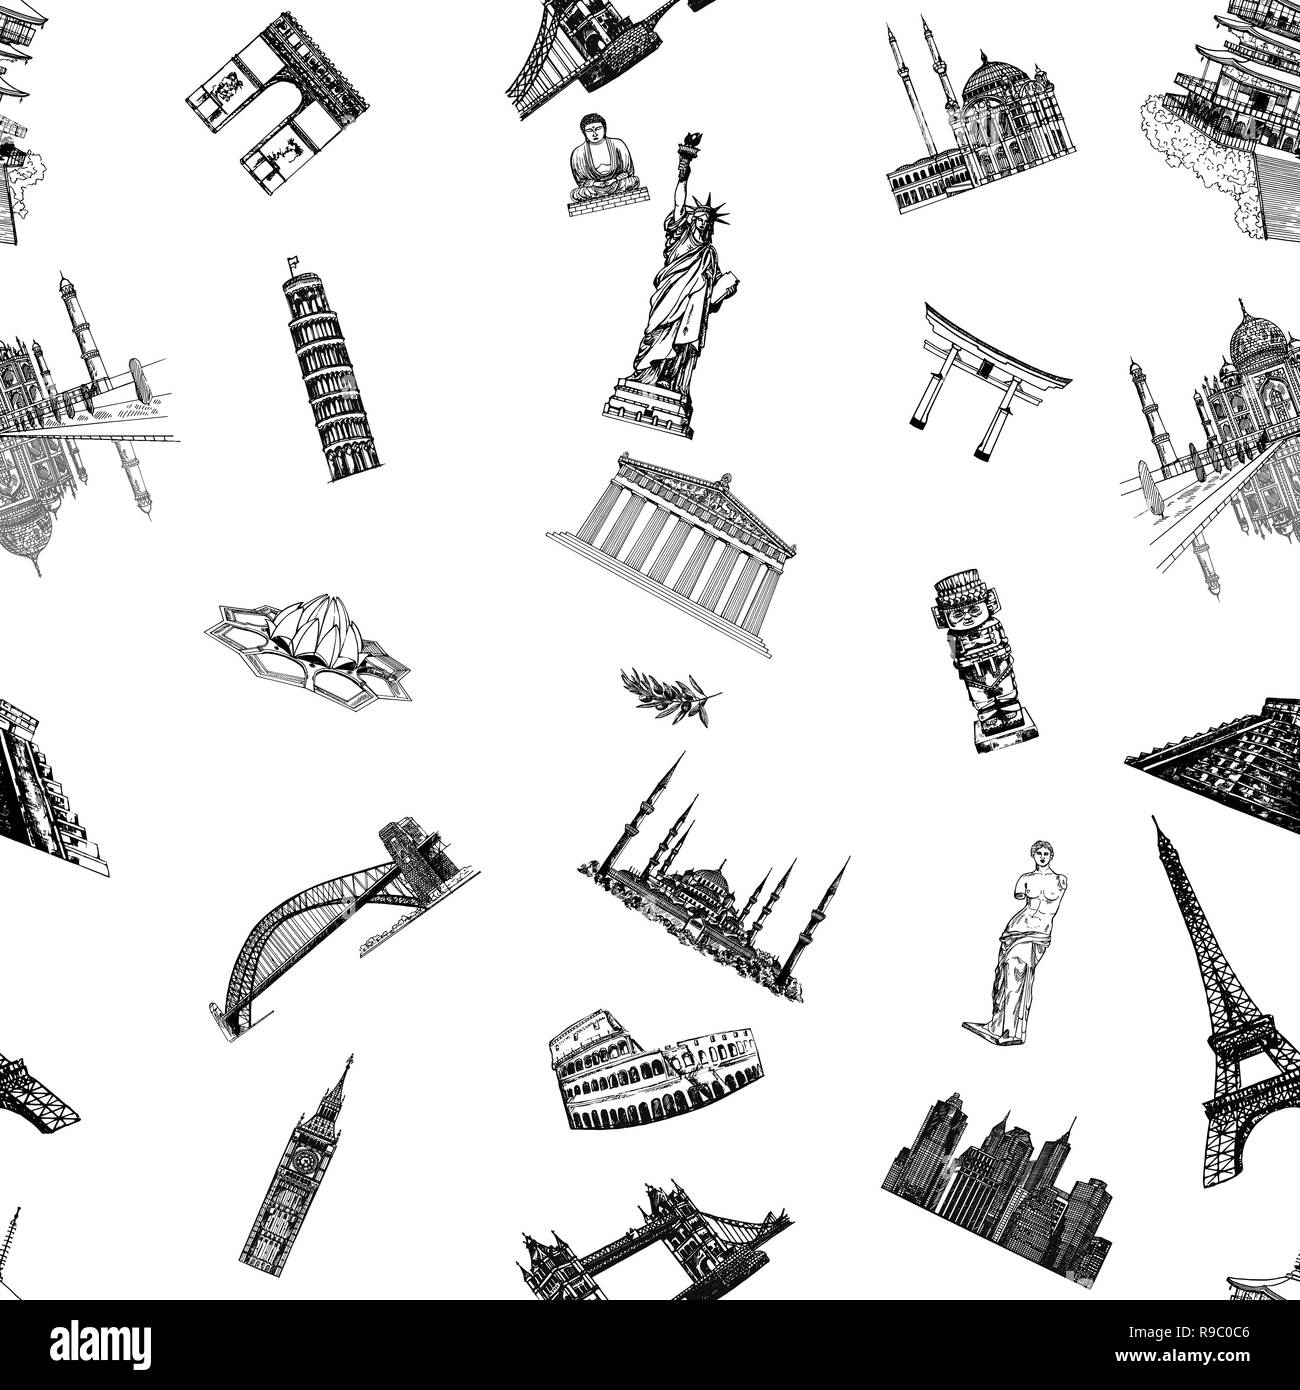 Seamless pattern of hand drawn sketch style world's famous landmarks and sights isolated on white background. Vector illustration. Stock Vector